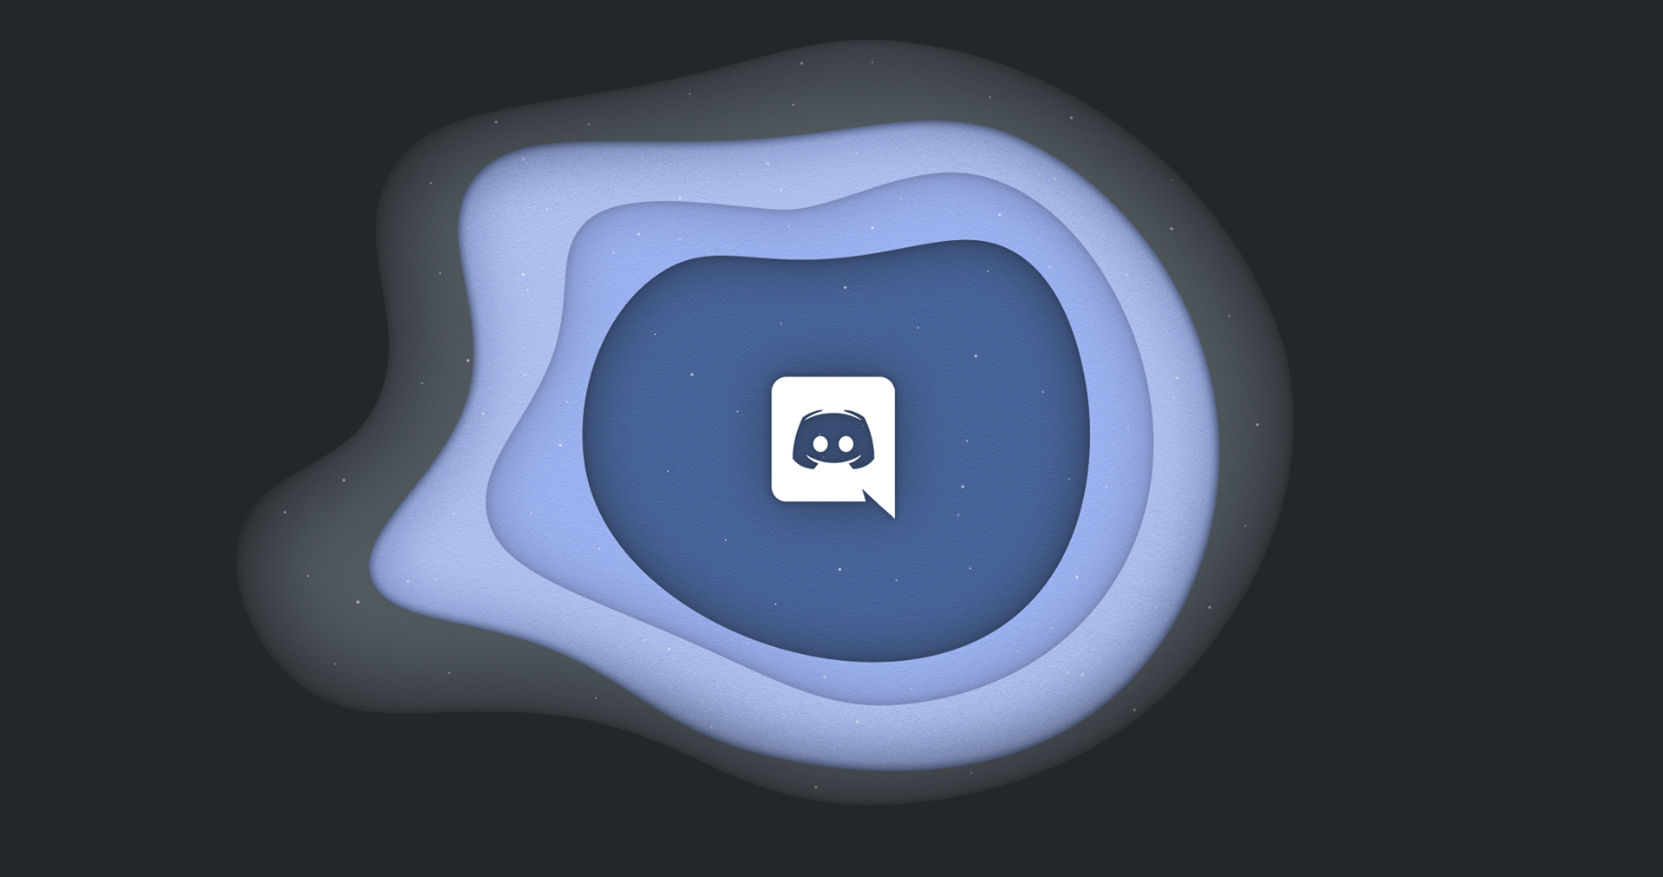 How to Hide What You're Playing on Discord